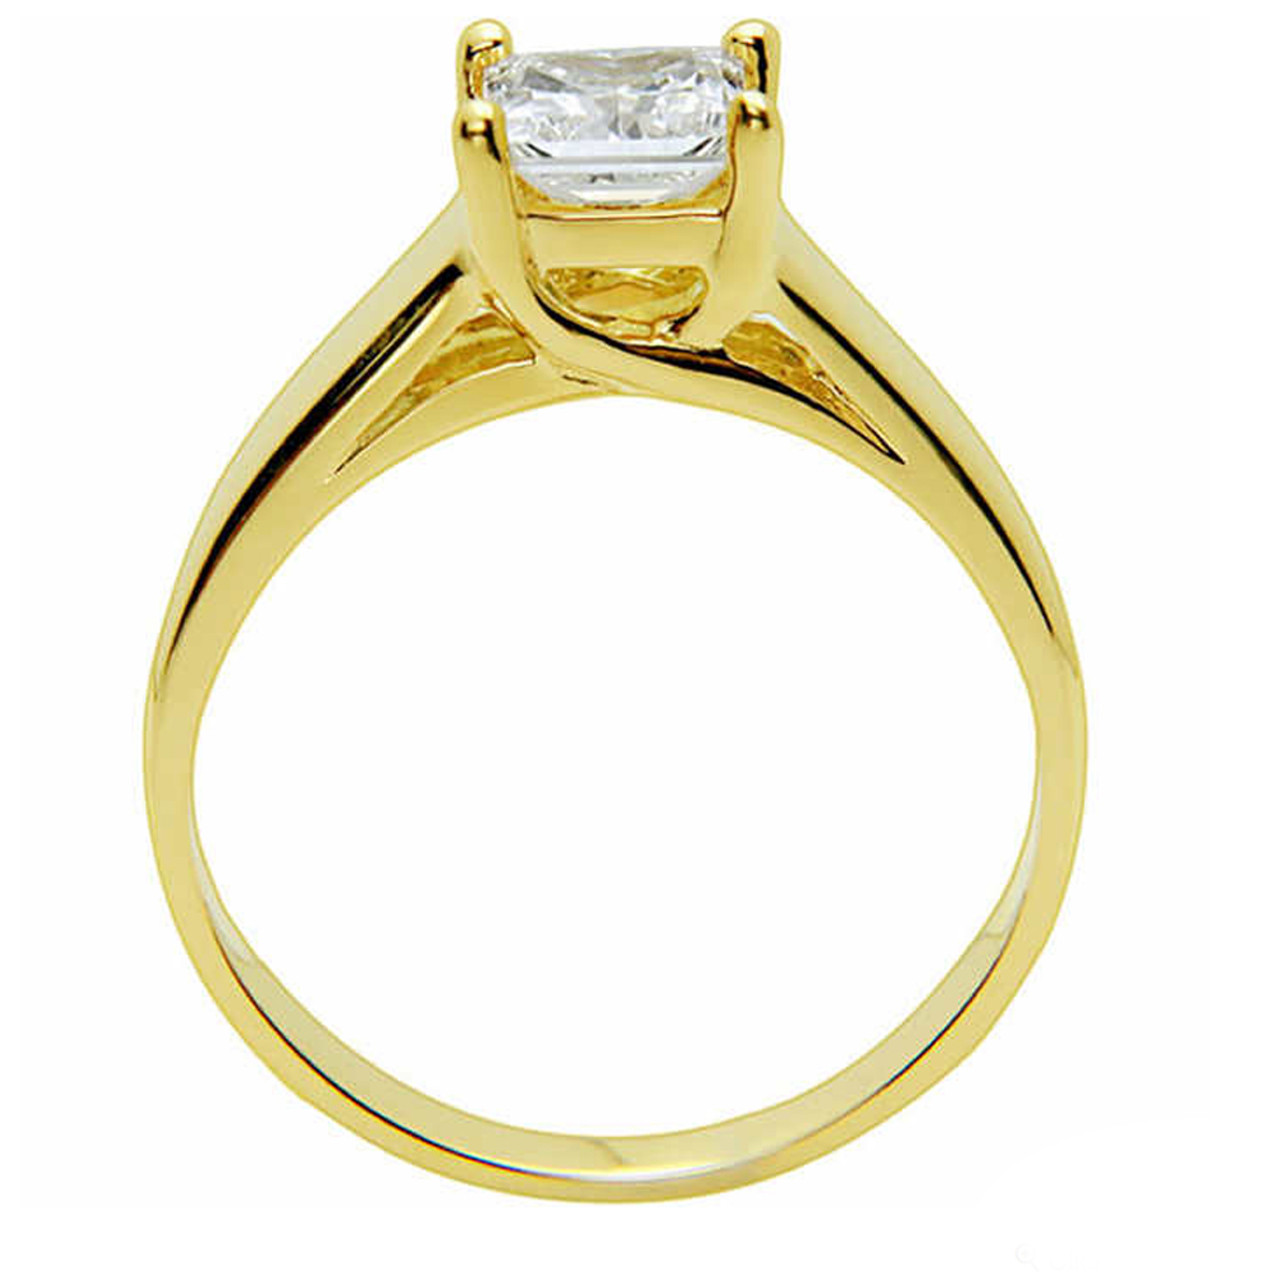 1 CT Princess Cut Diamond Solitaire Engagement Ring 14k Yellow Gold